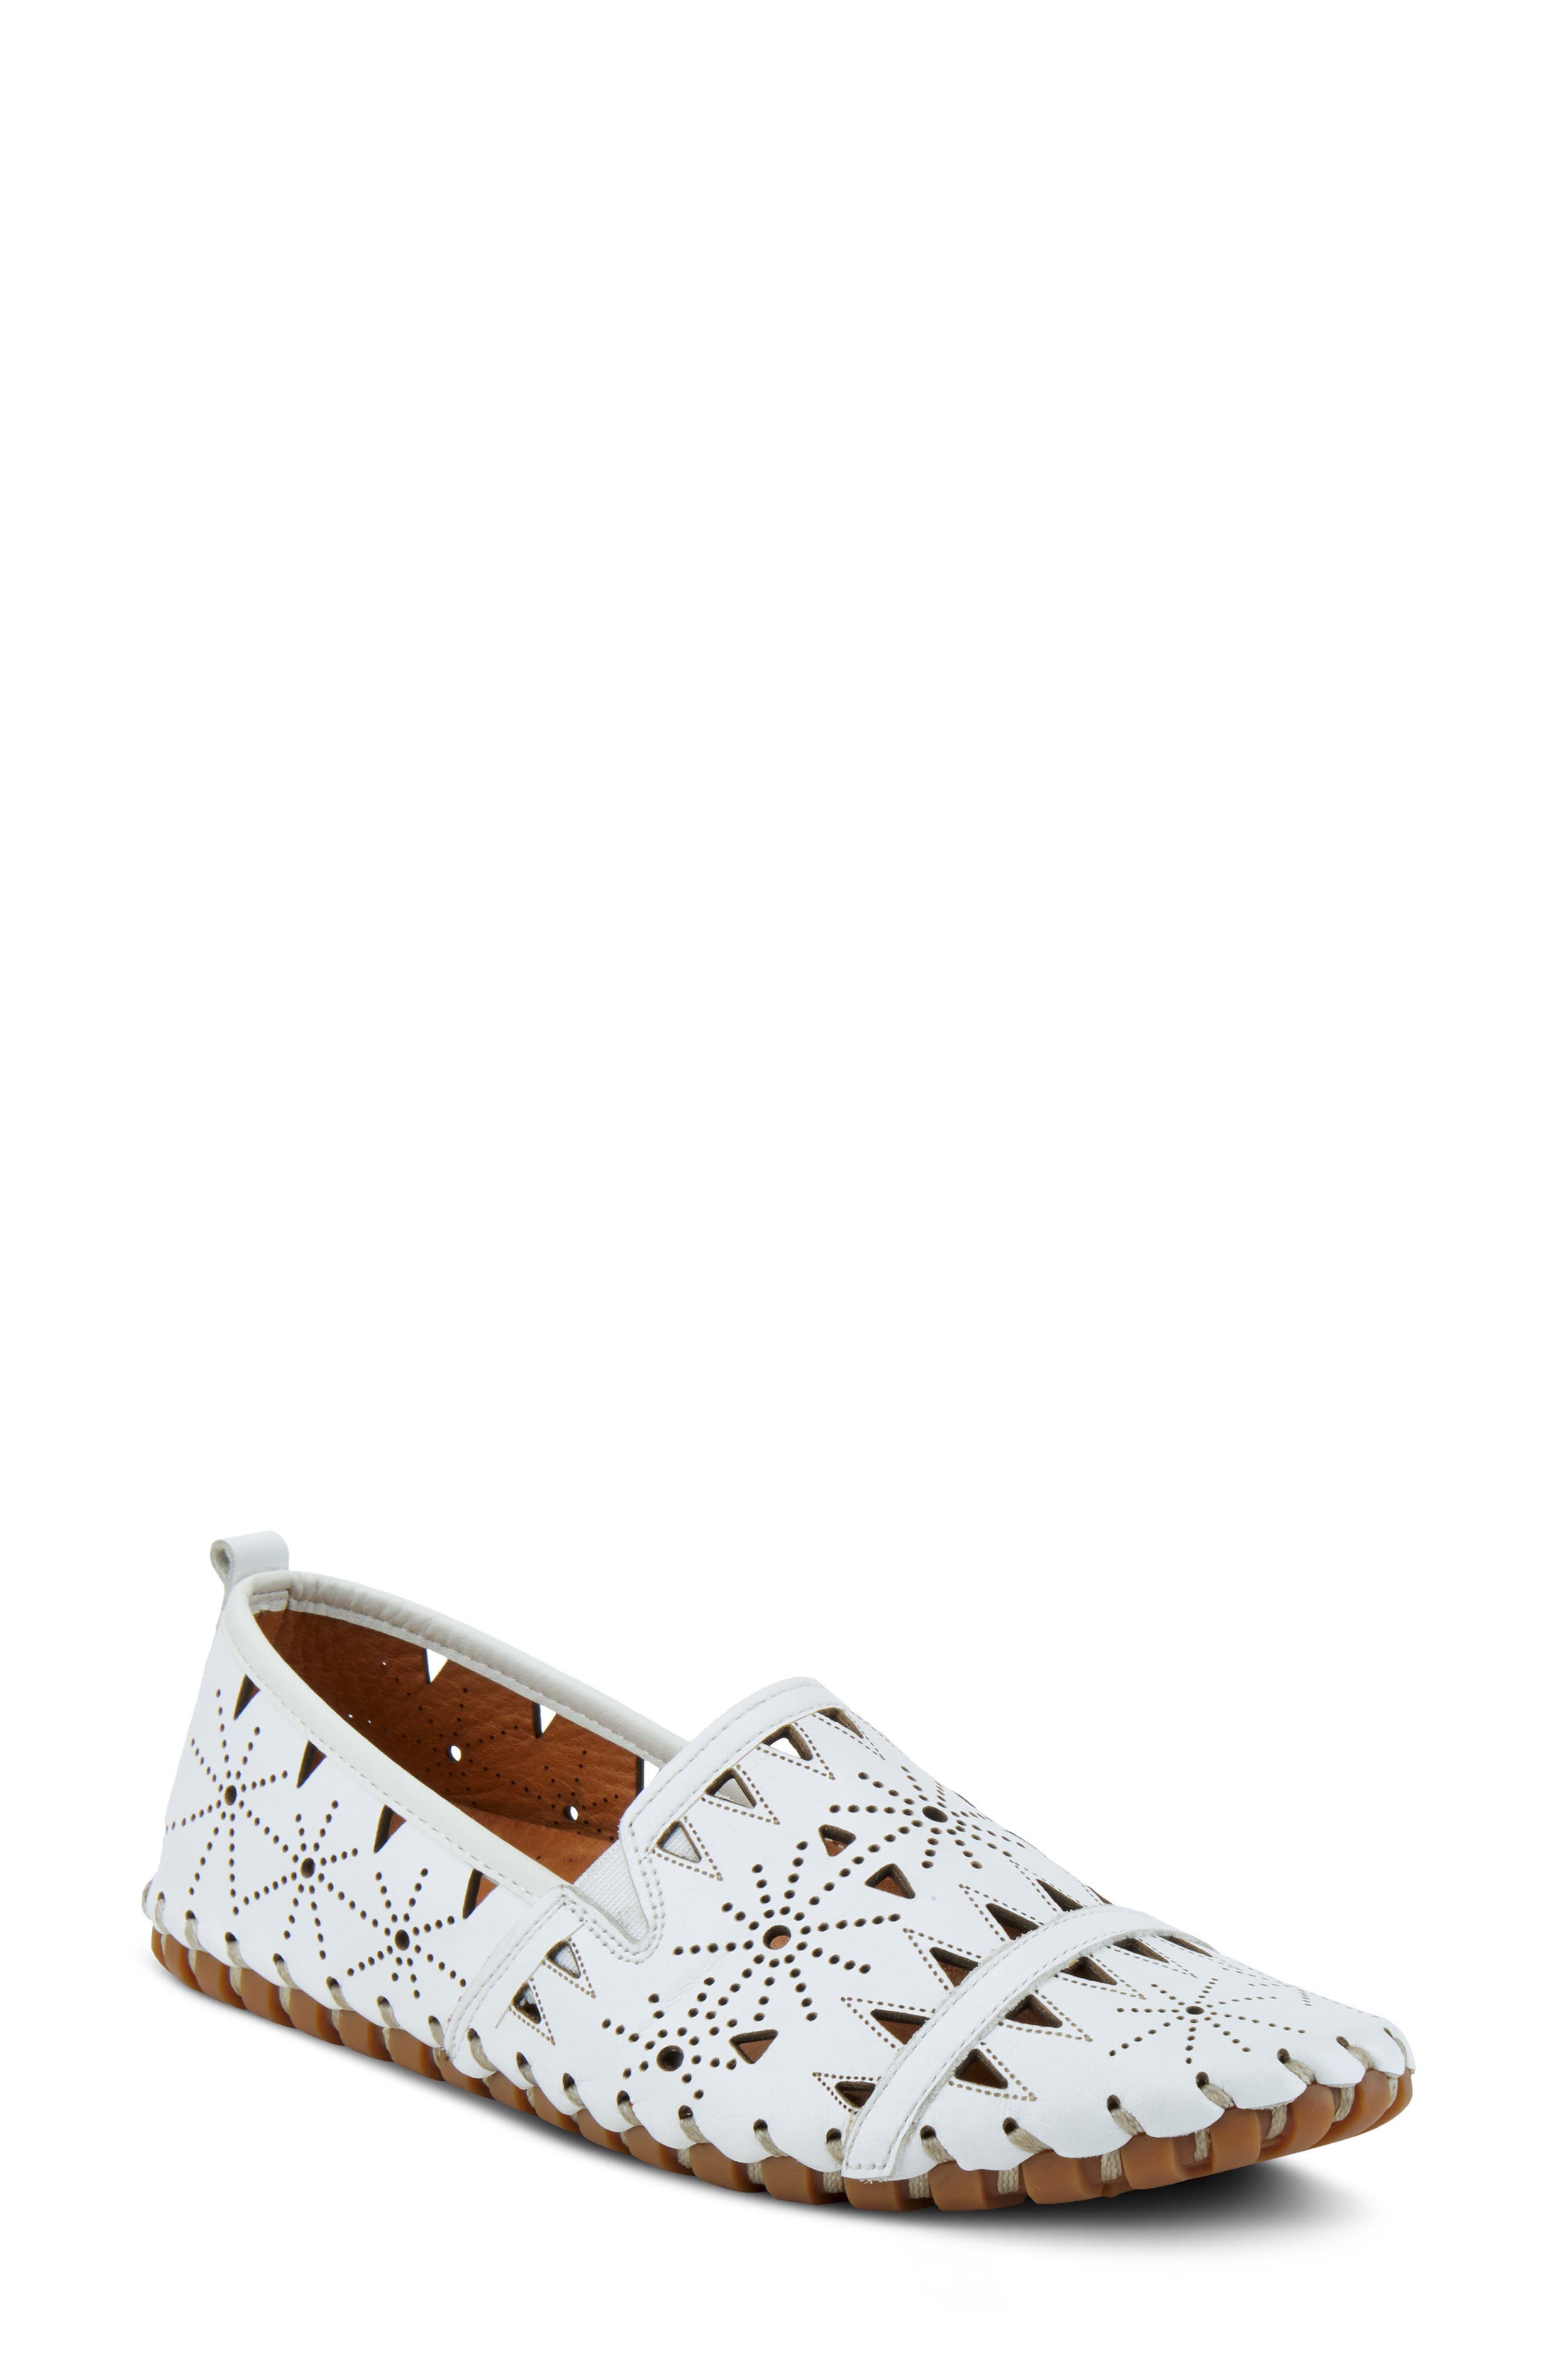 Women's Flat Spring Step Shoes | Nordstrom